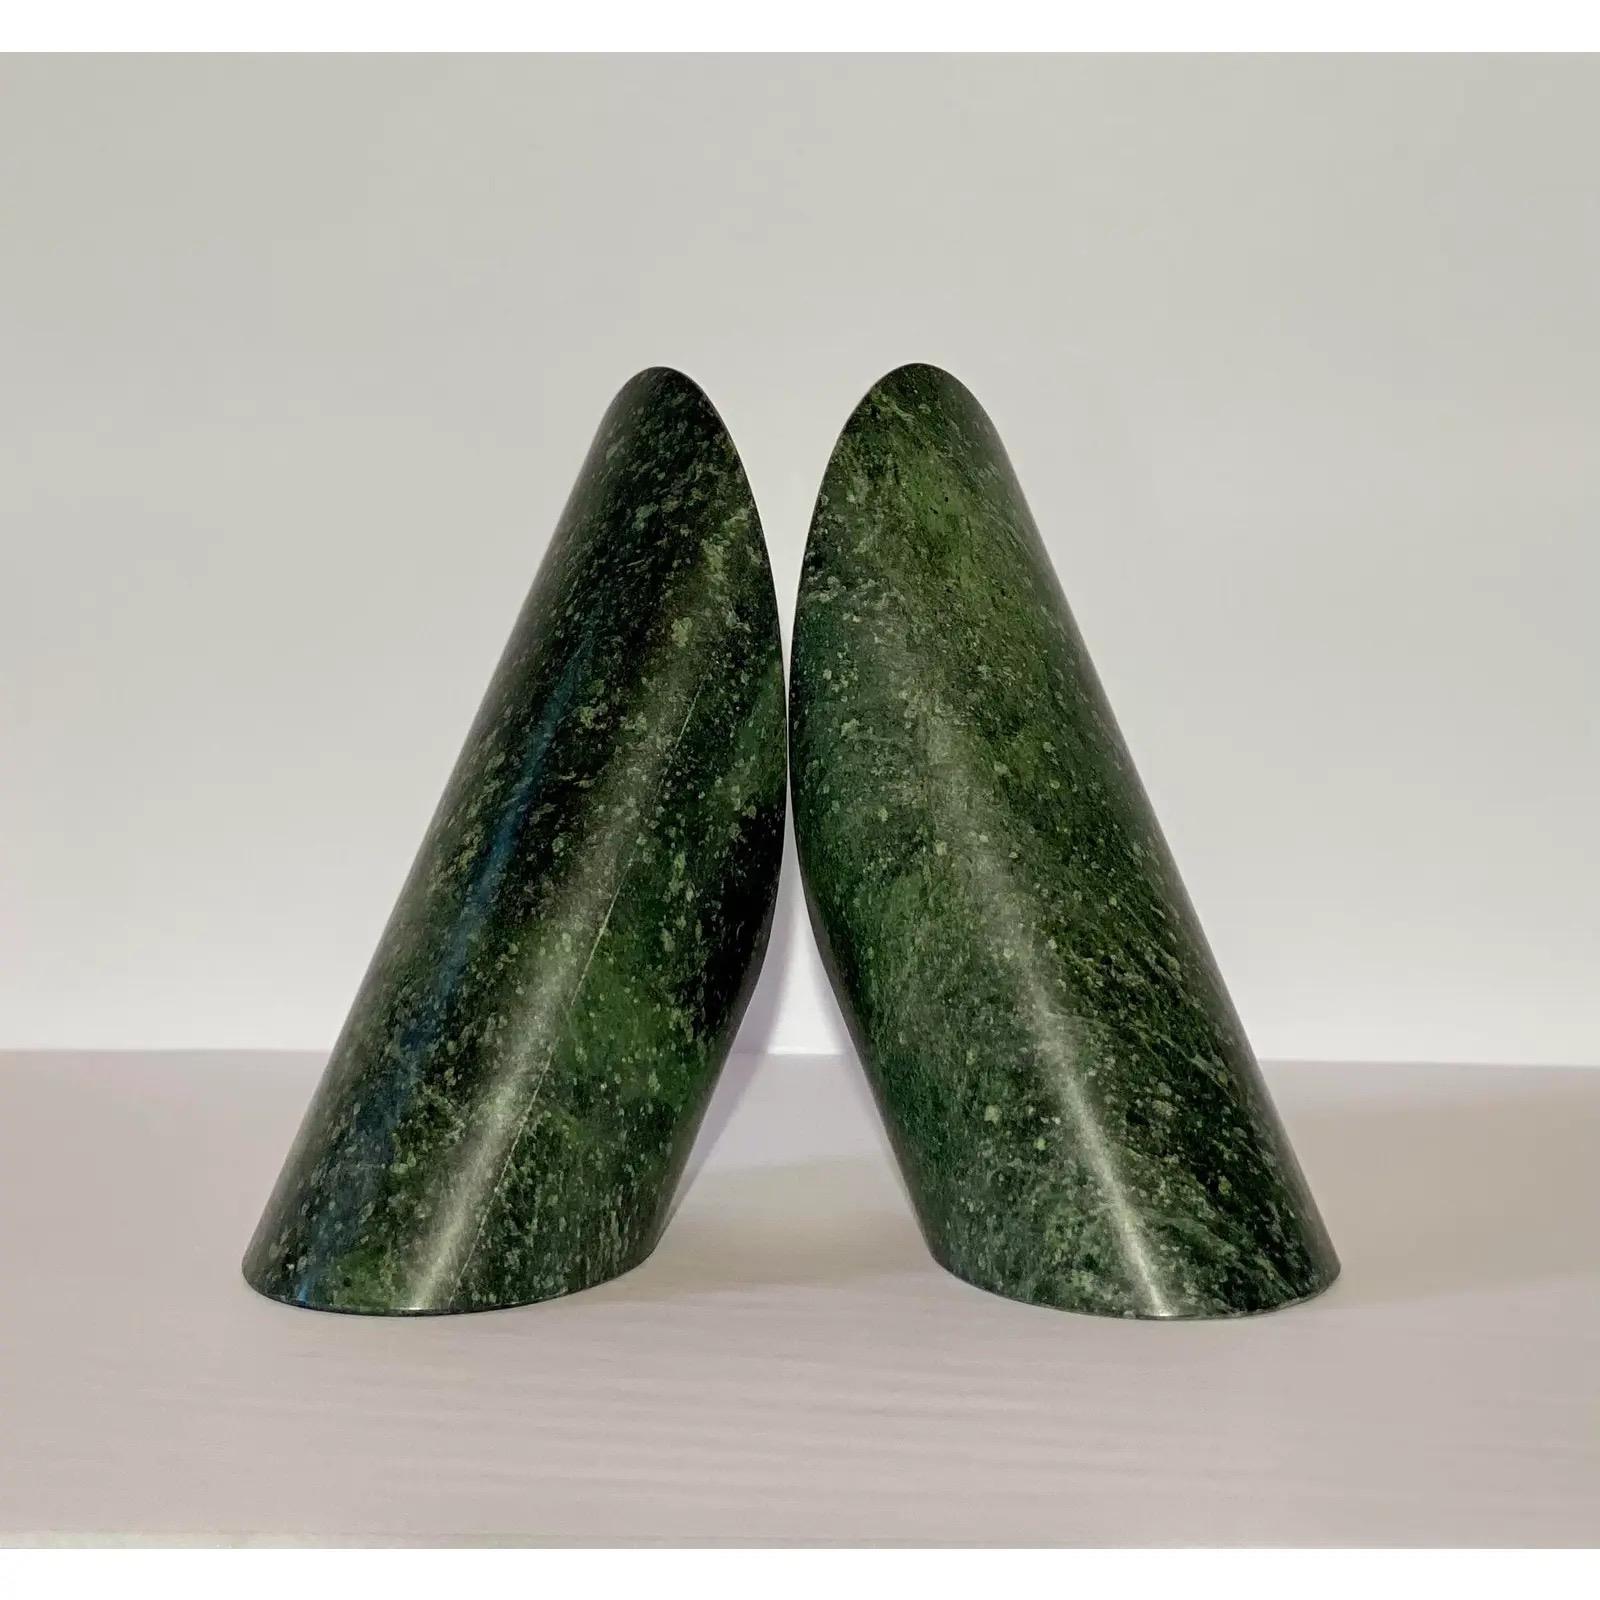 Vintage Green Cylinder Marble Bookends, a Pair 1